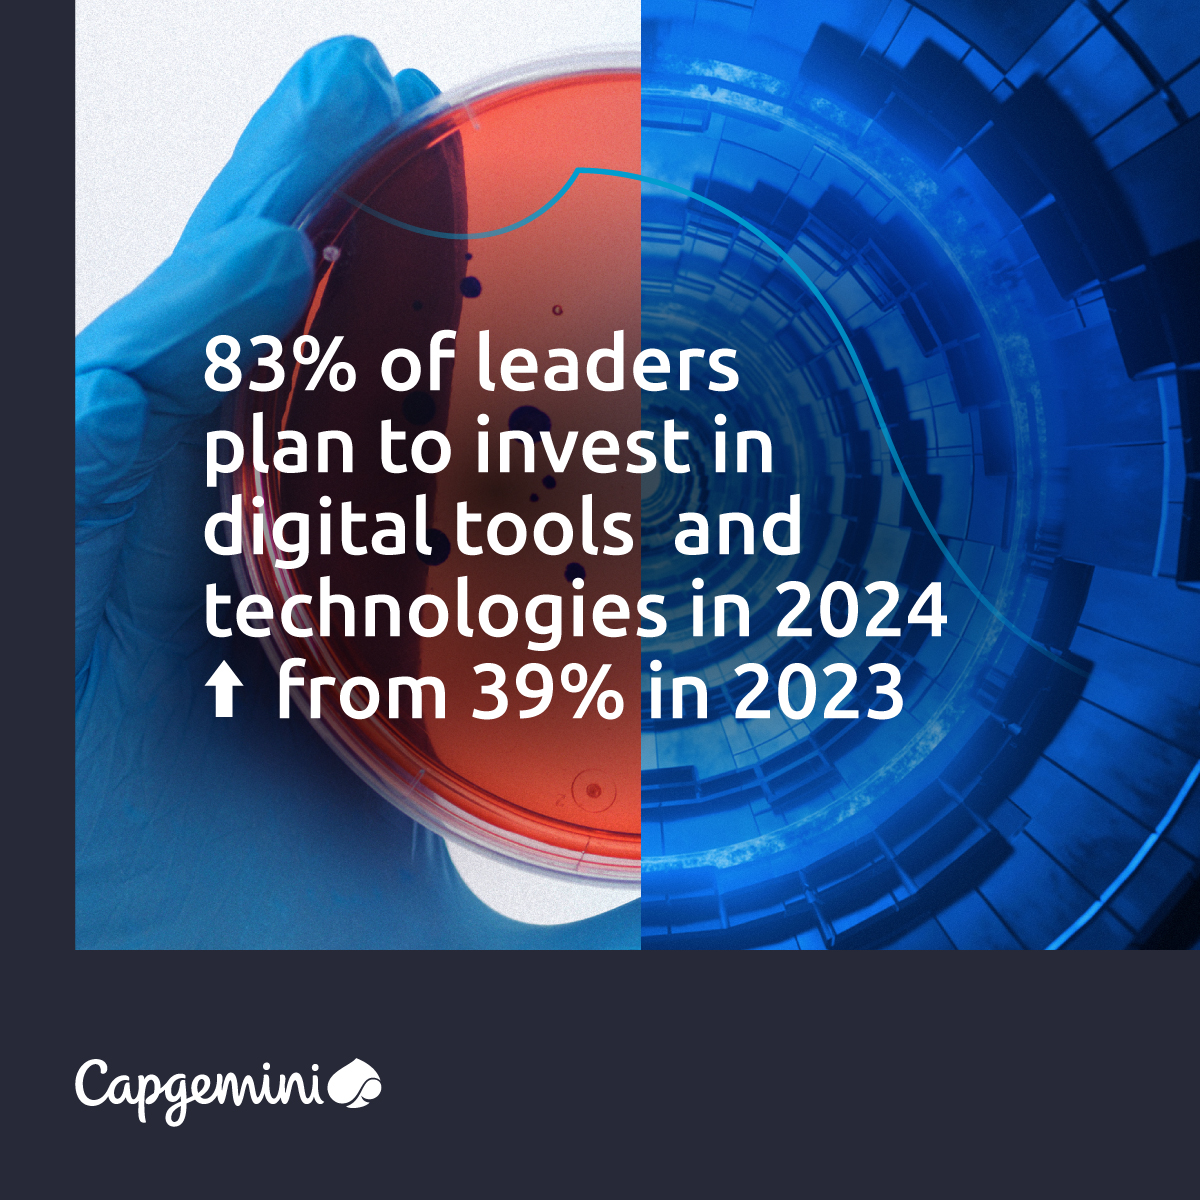 Our recent report revealed that 83% of business leaders plan to increase investments in #DigitalTools and technologies in 2024, vis-à-vis only 39% last year. Let's see what is in store for the coming year: bit.ly/48T4i2X #WEF24 #IntelligentIndustry